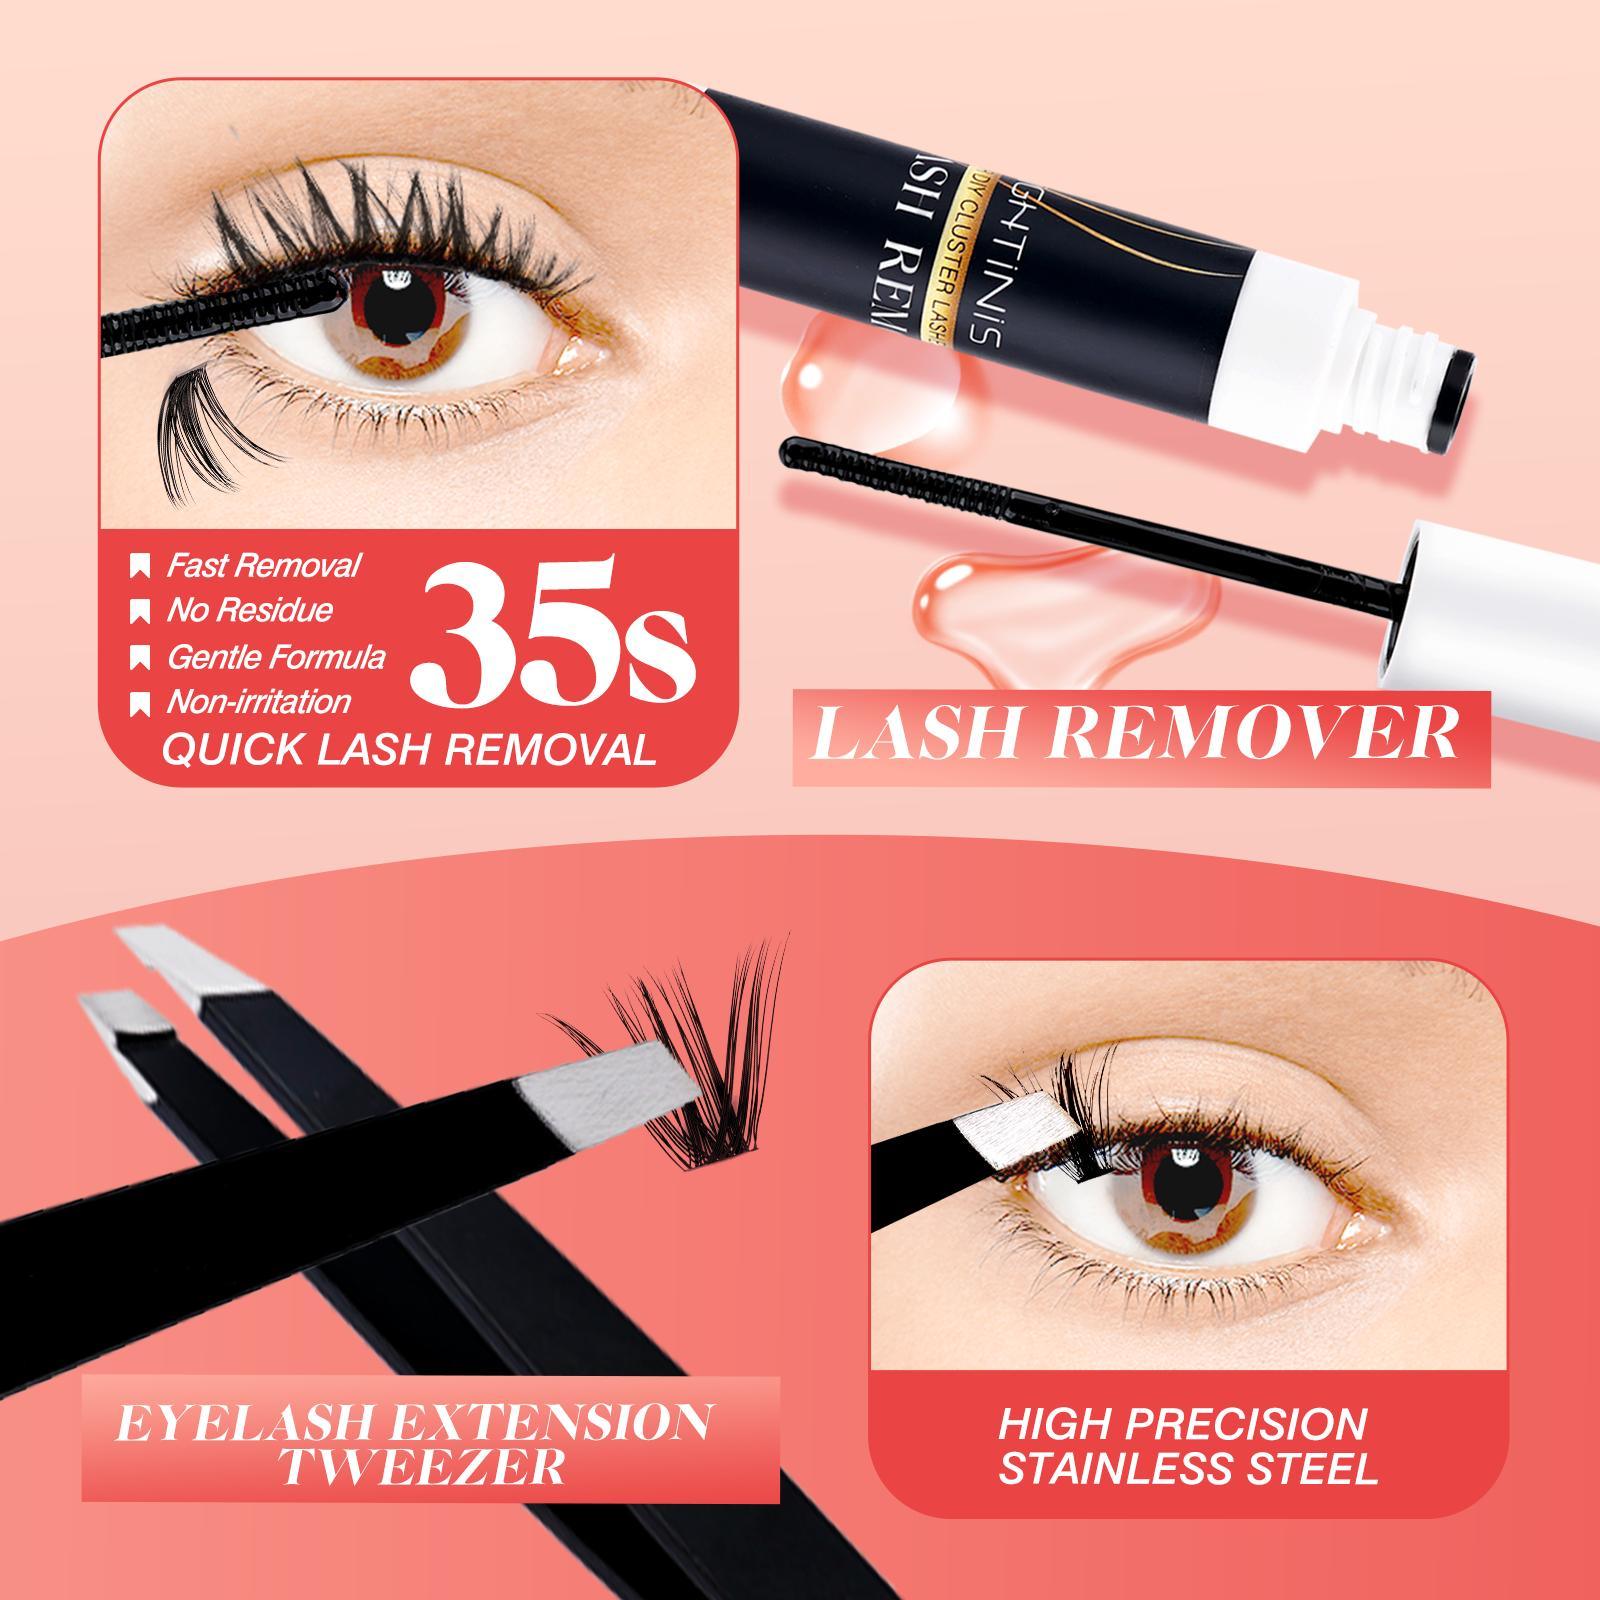 Lankiz 30p/40p/50p Lash Clusters New Arrival and All-in-One DIY Lash Kit- Natural Bloom - Lankiz Official Store